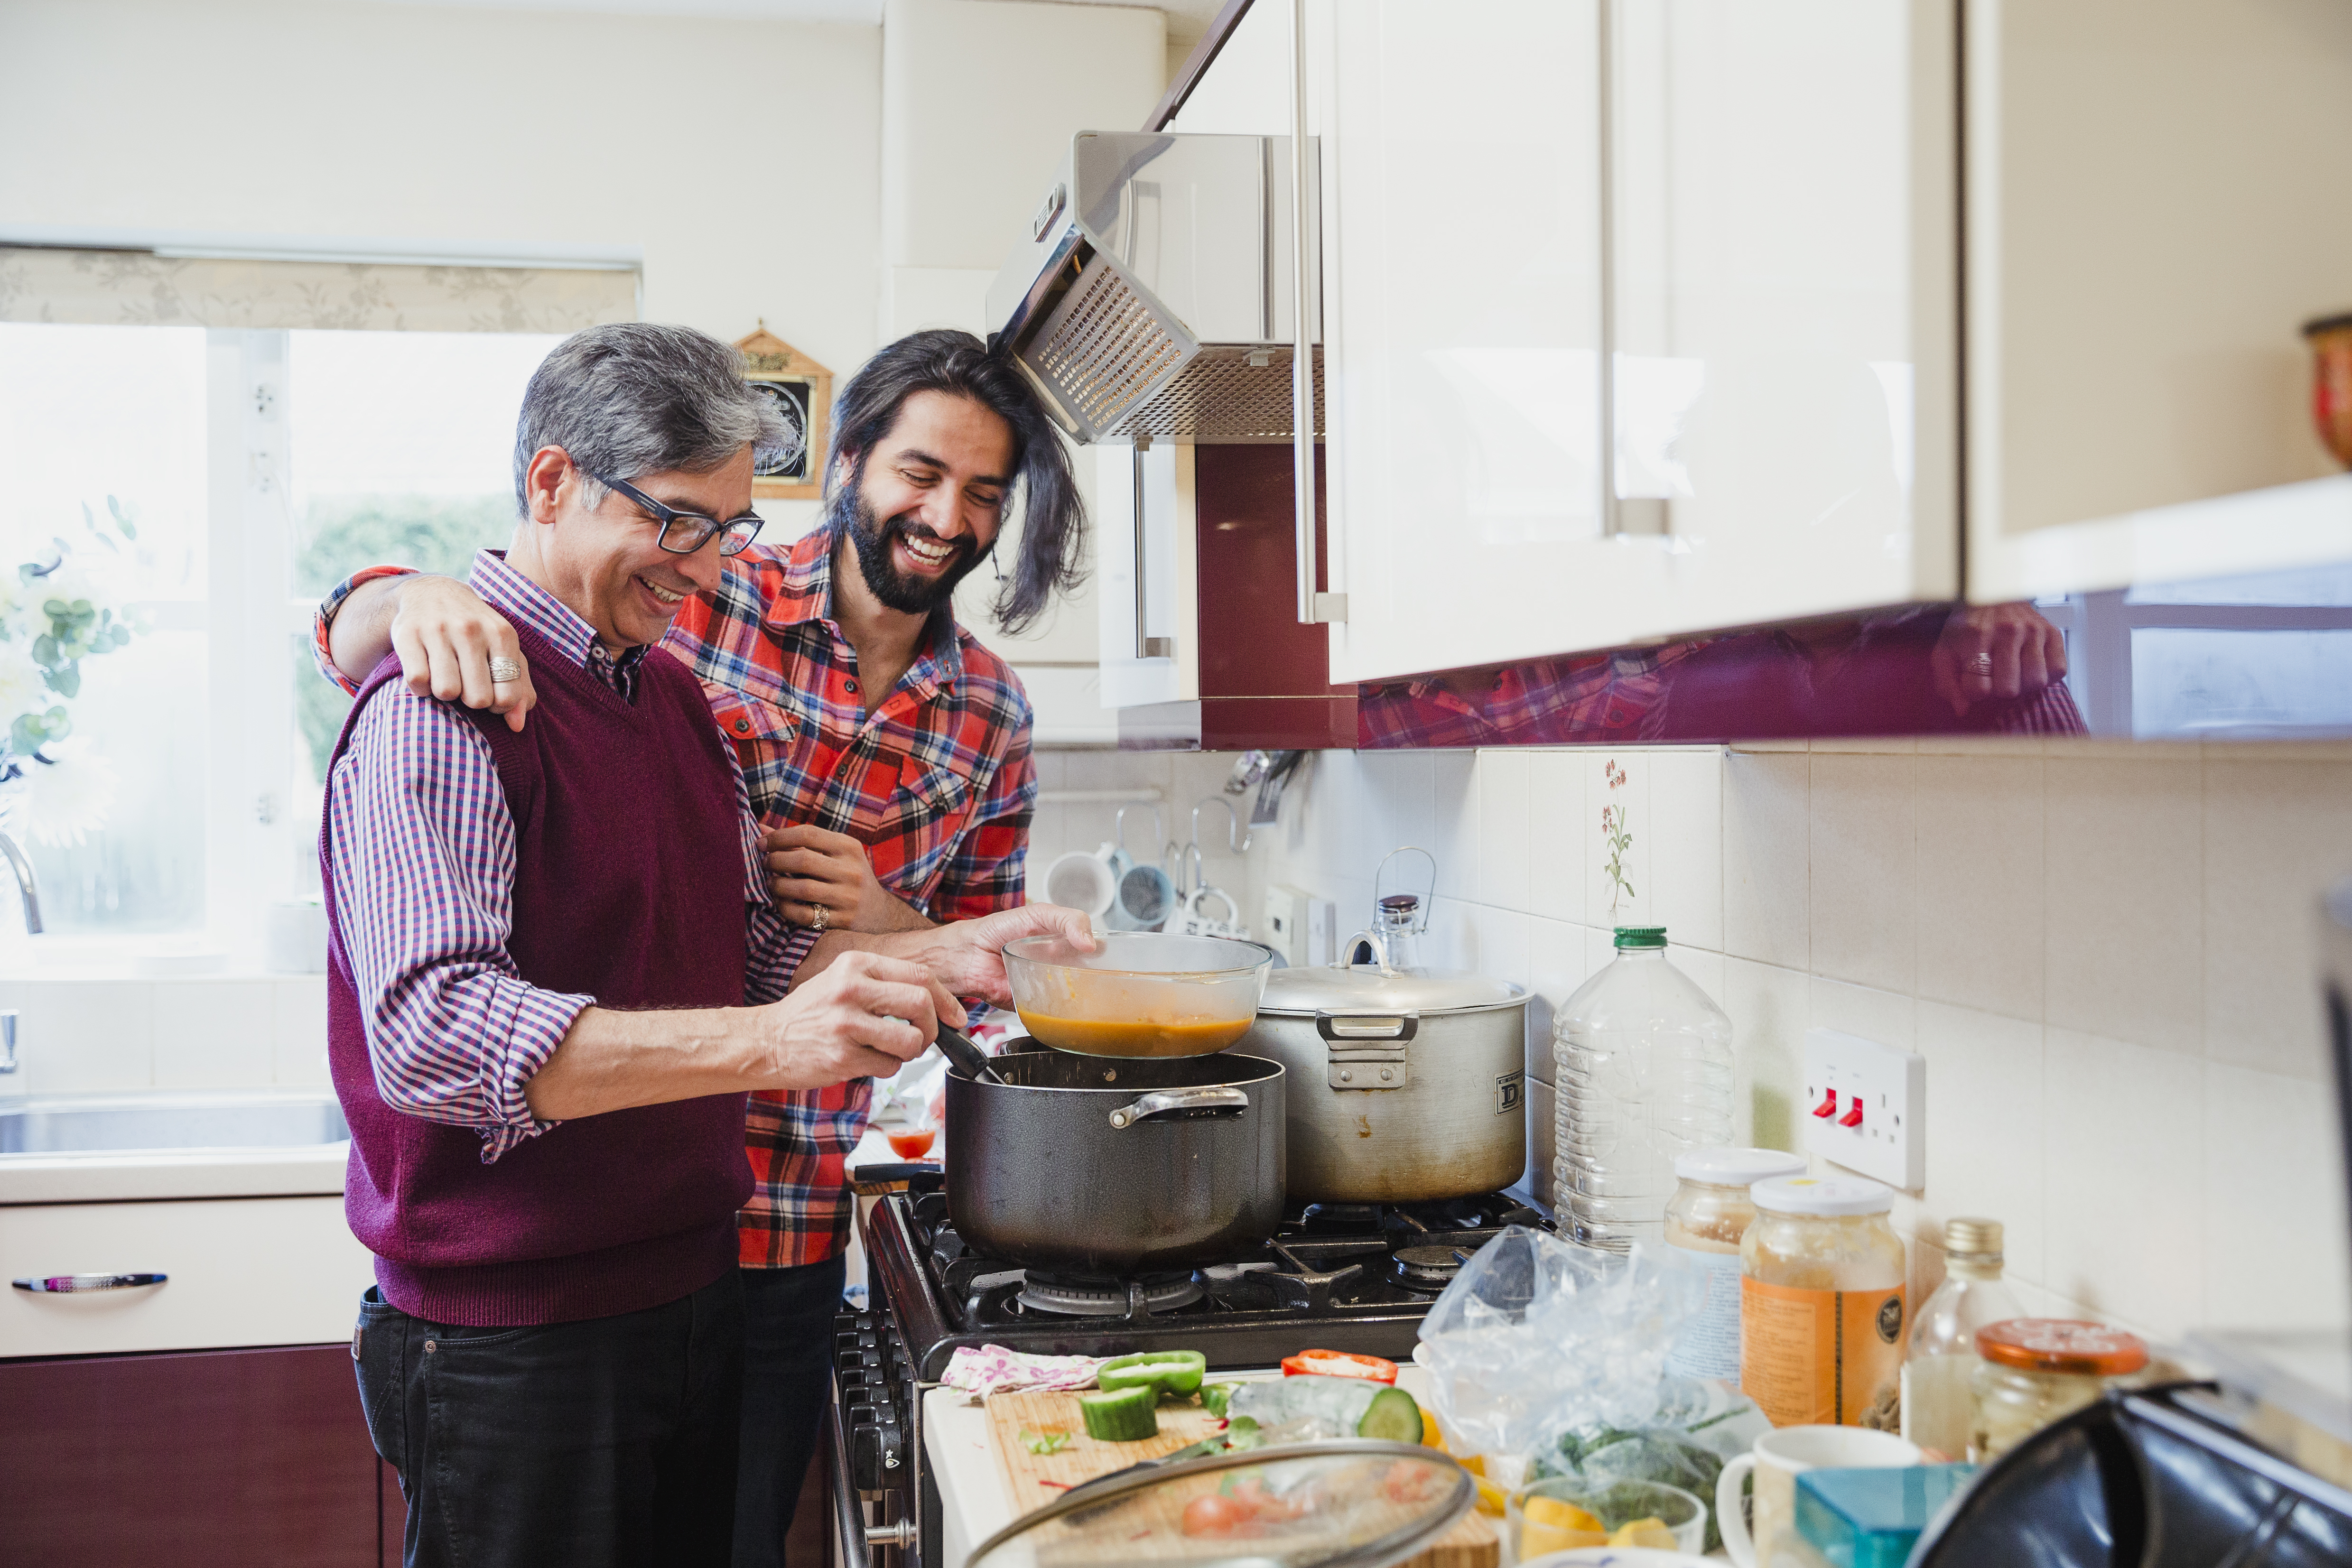 South-Asian father and son stood over a dish on the hob, cooking in kitchen